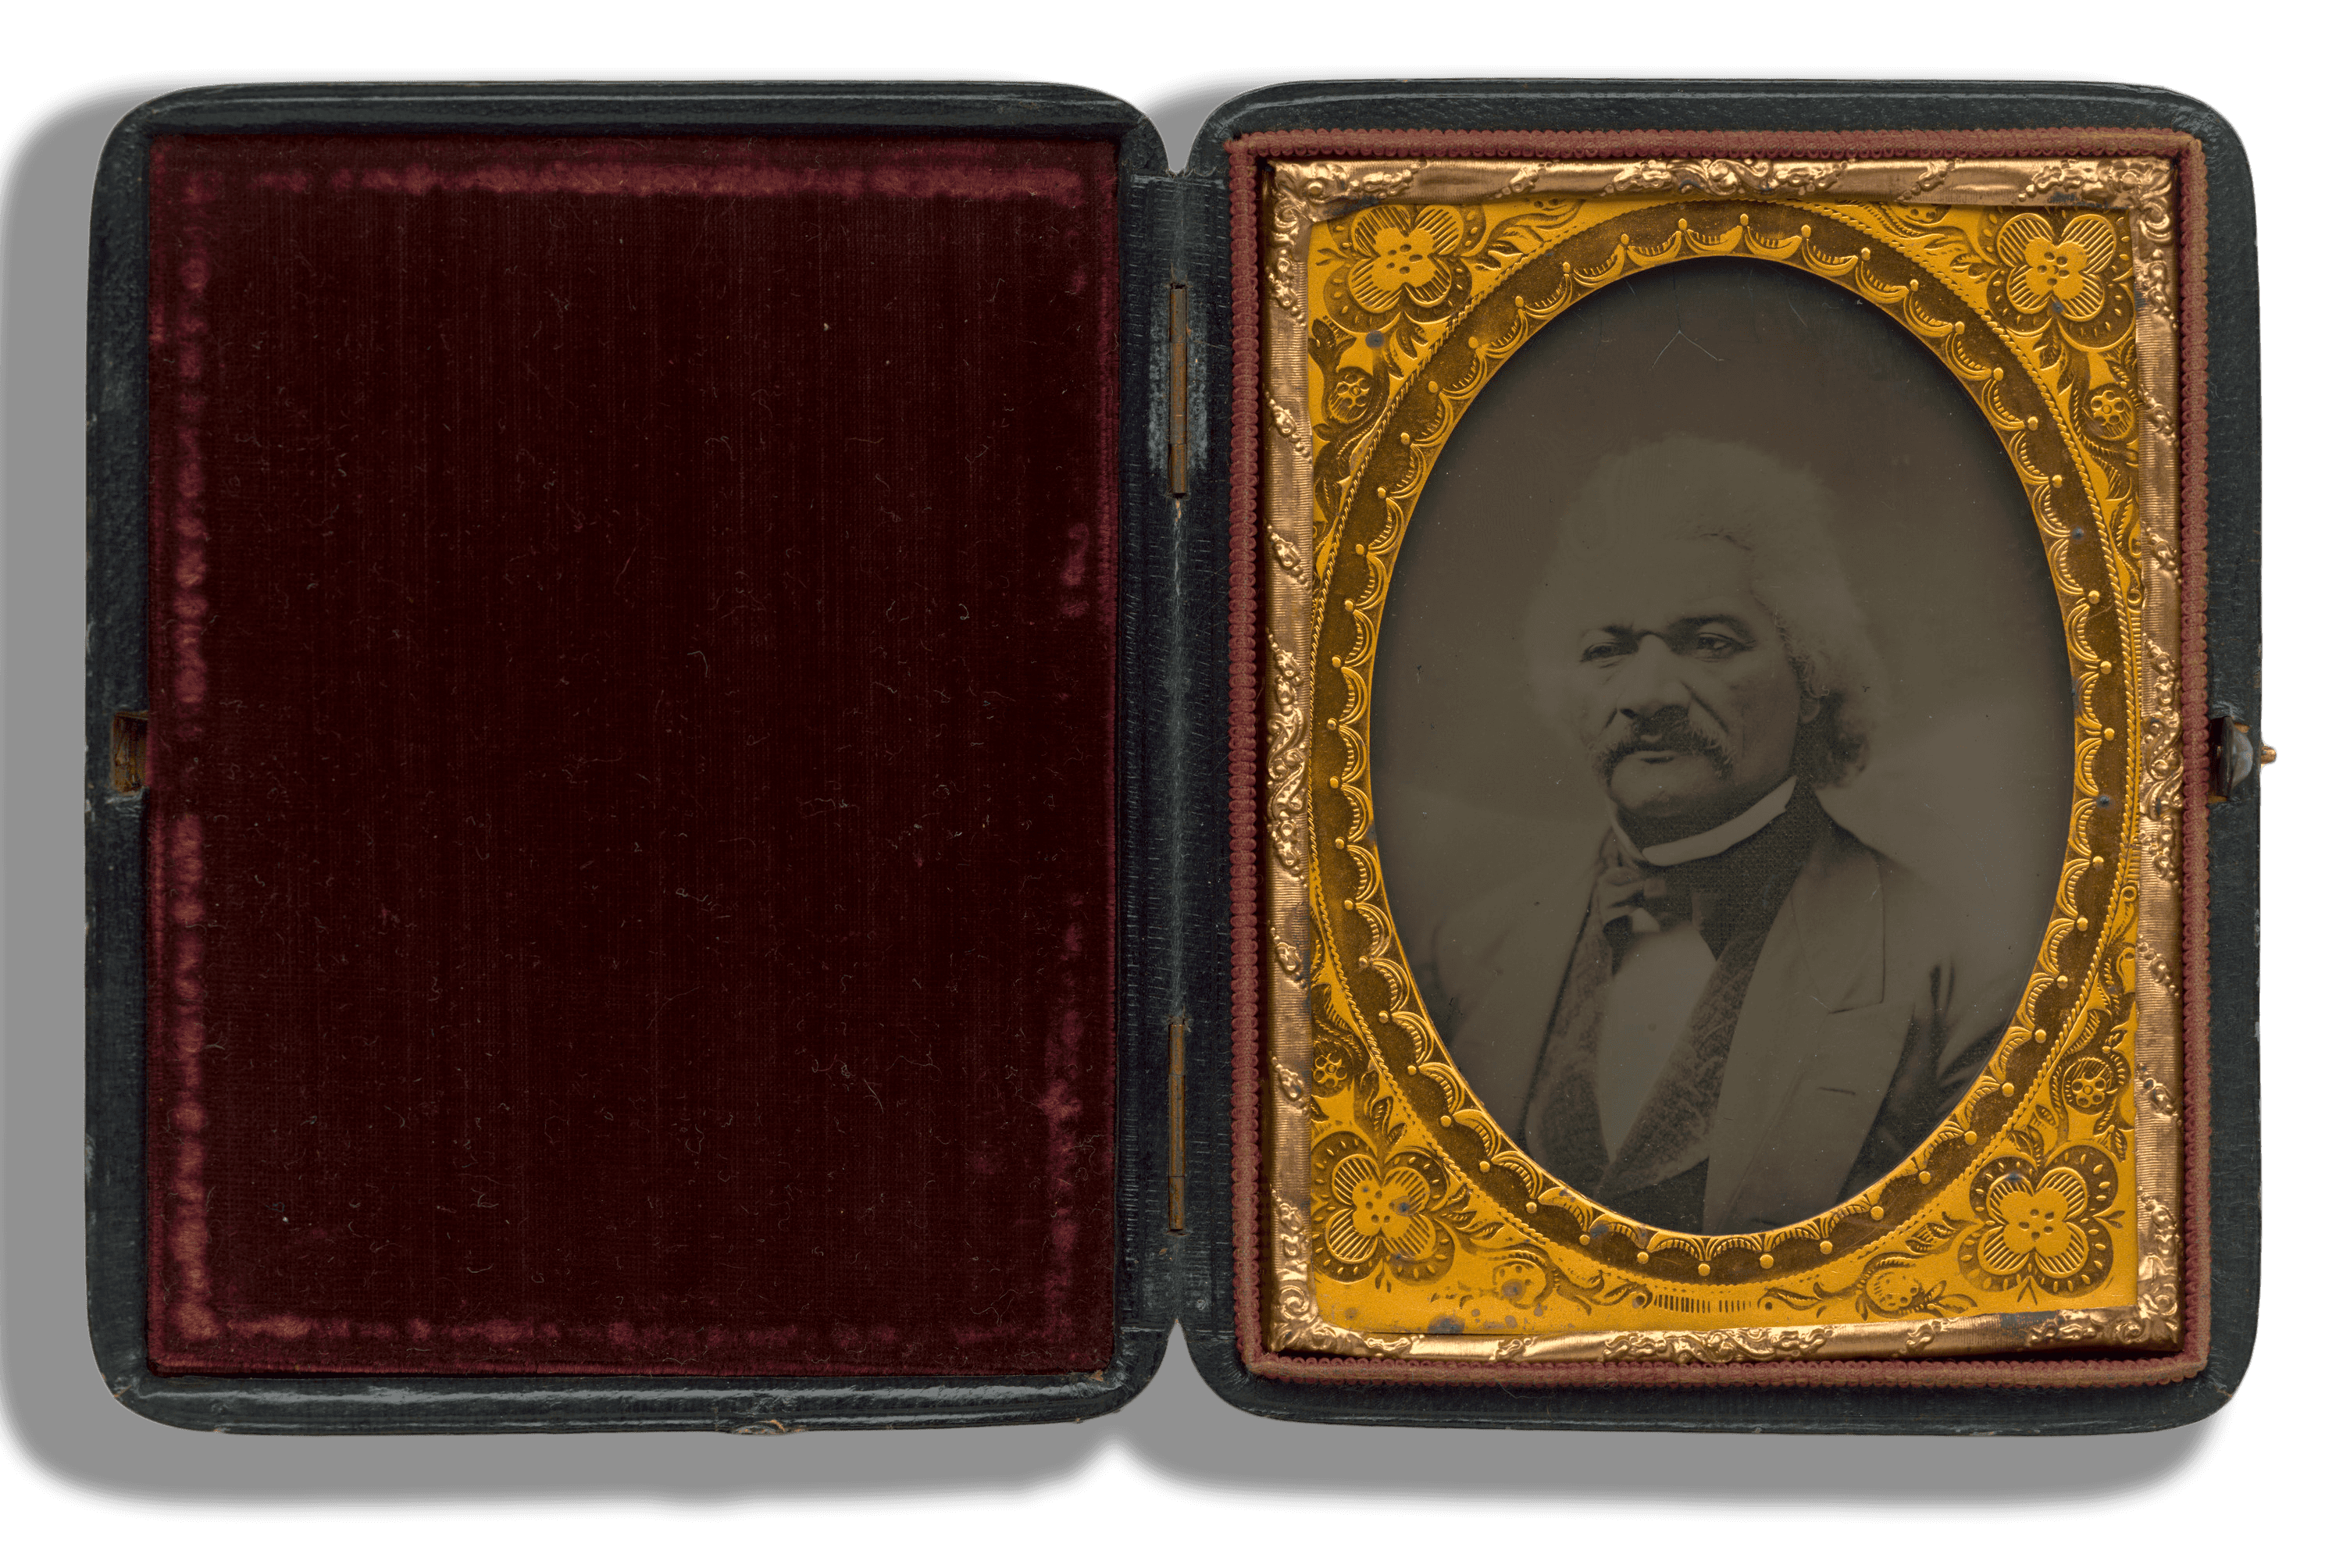 A pocket size ambrotype of Frederick Douglass in a gold frame. Douglass is on the right side.